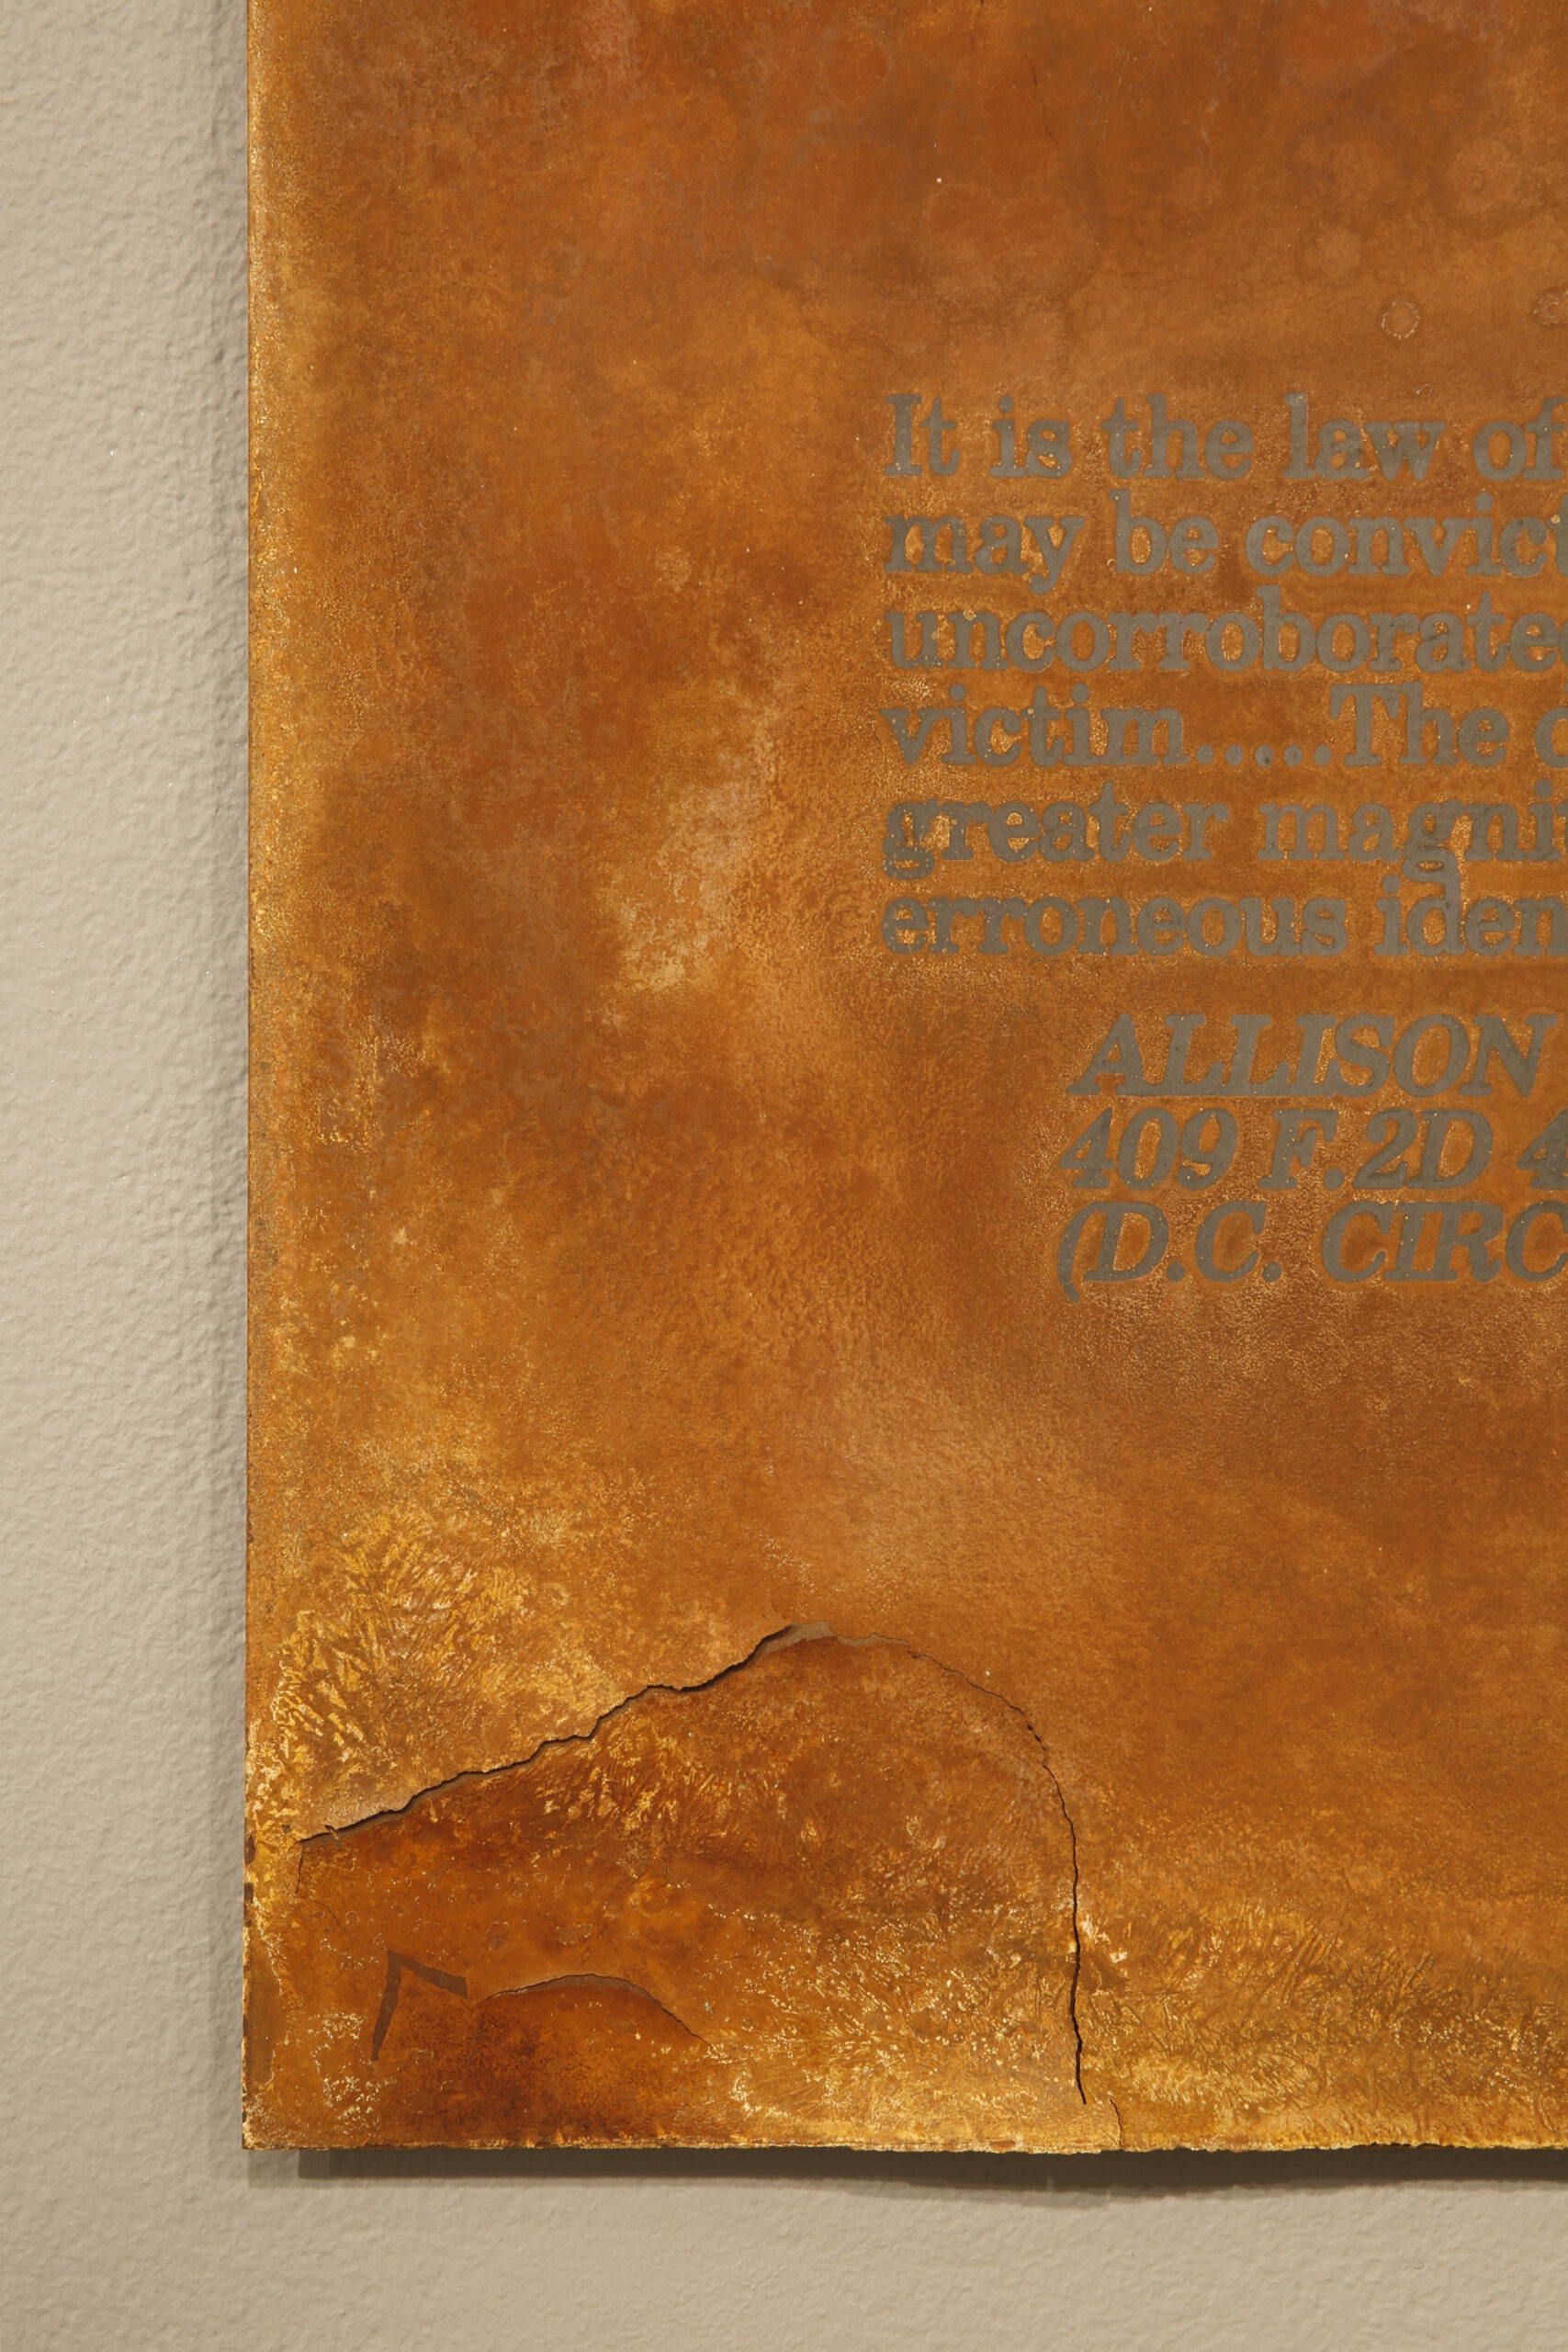 Screenprint resist on steel with rust patina, text from 1969 DC Circuit Court ruling on the attempted rape of an eleven-year-old girl